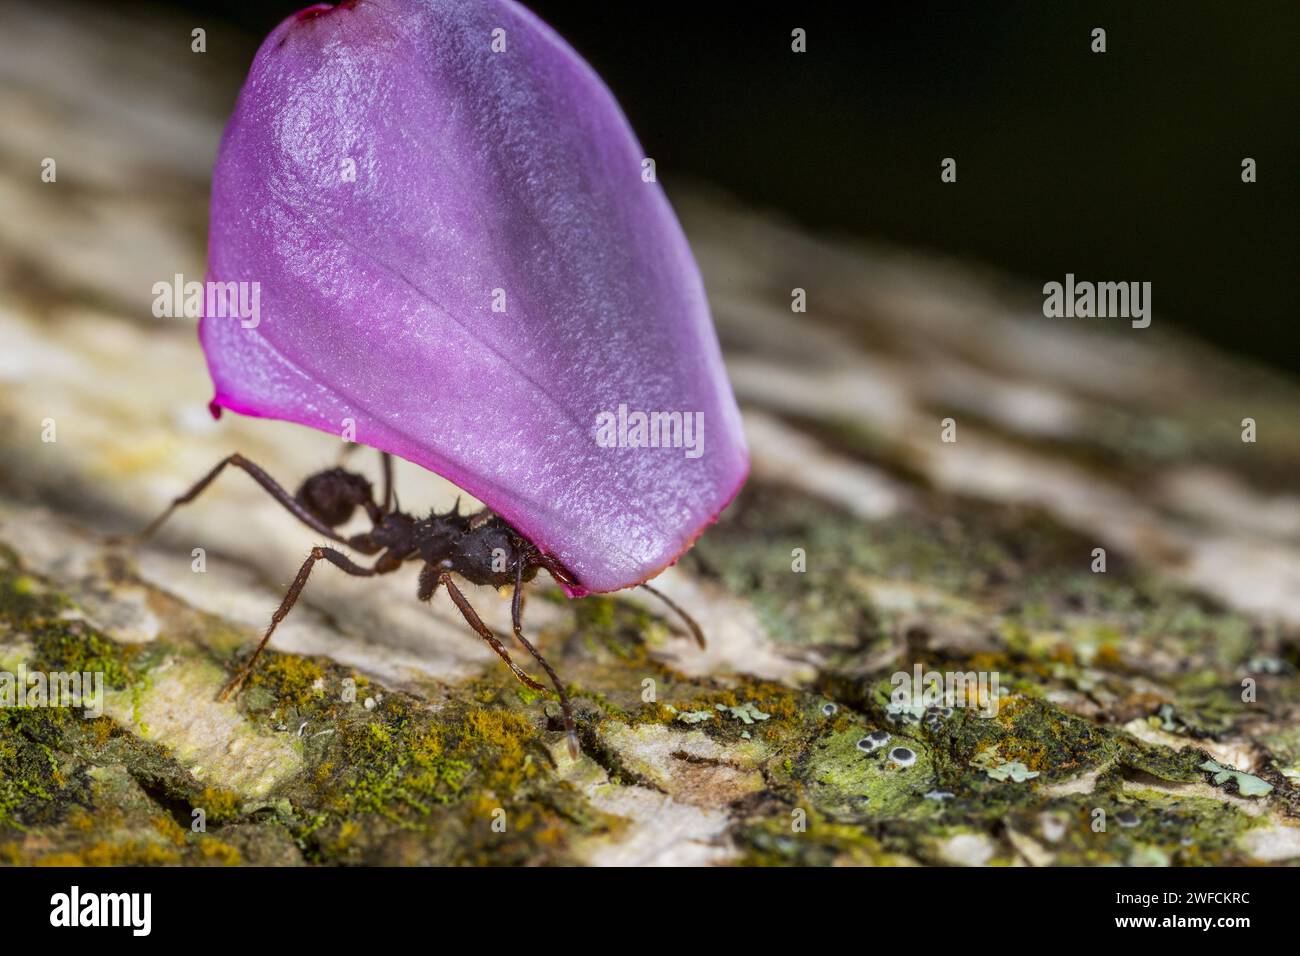 Ant carrying flower petal - Stock Photo